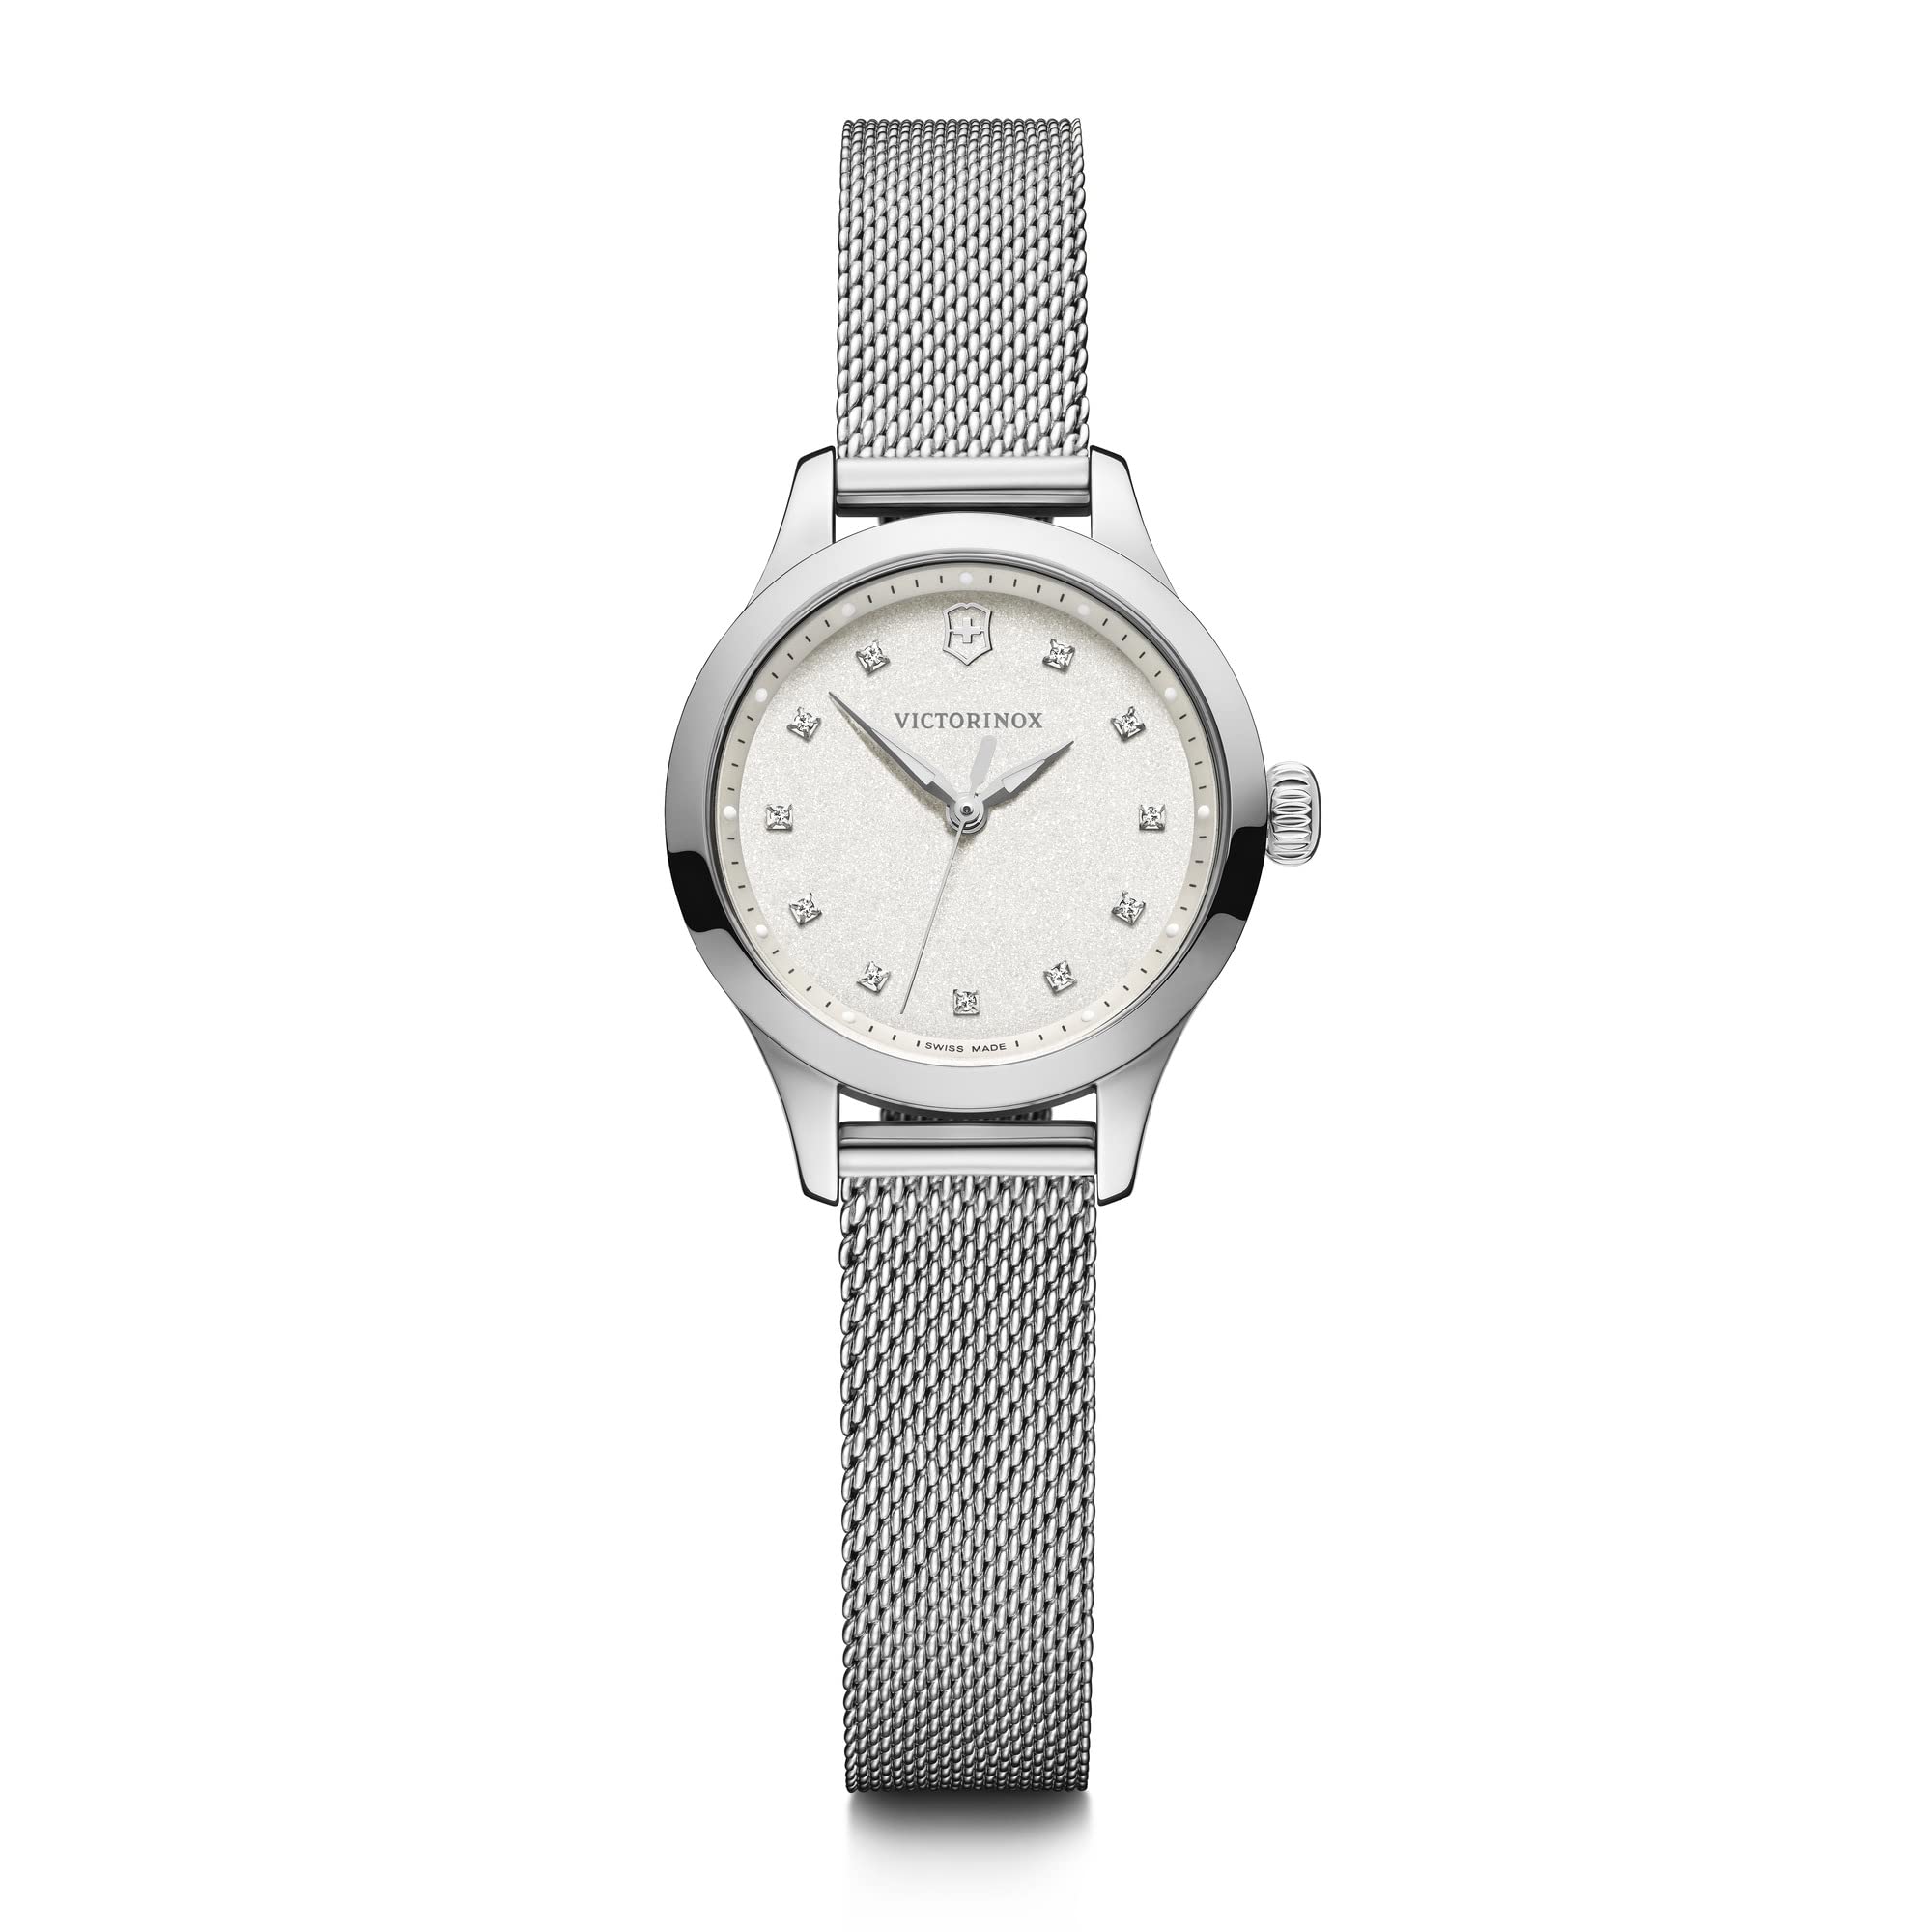 Victorinox Alliance XS Watch with White Dial and Silver Mesh Bracelet